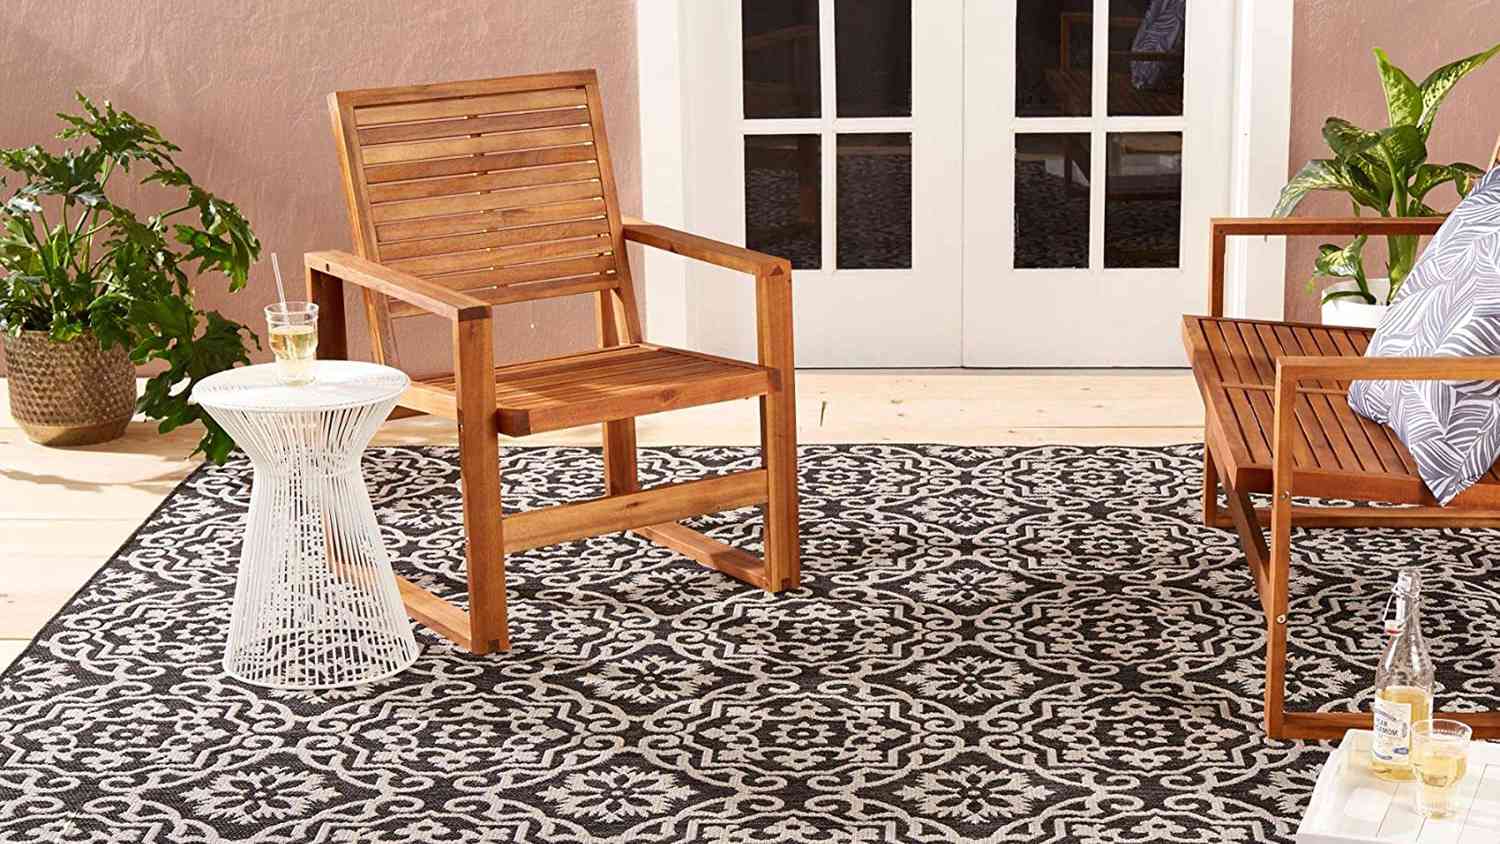 9 Best Outdoor Rugs For 2021 According, What Are The Best Outdoor Rugs Made Of Recycled Plastic